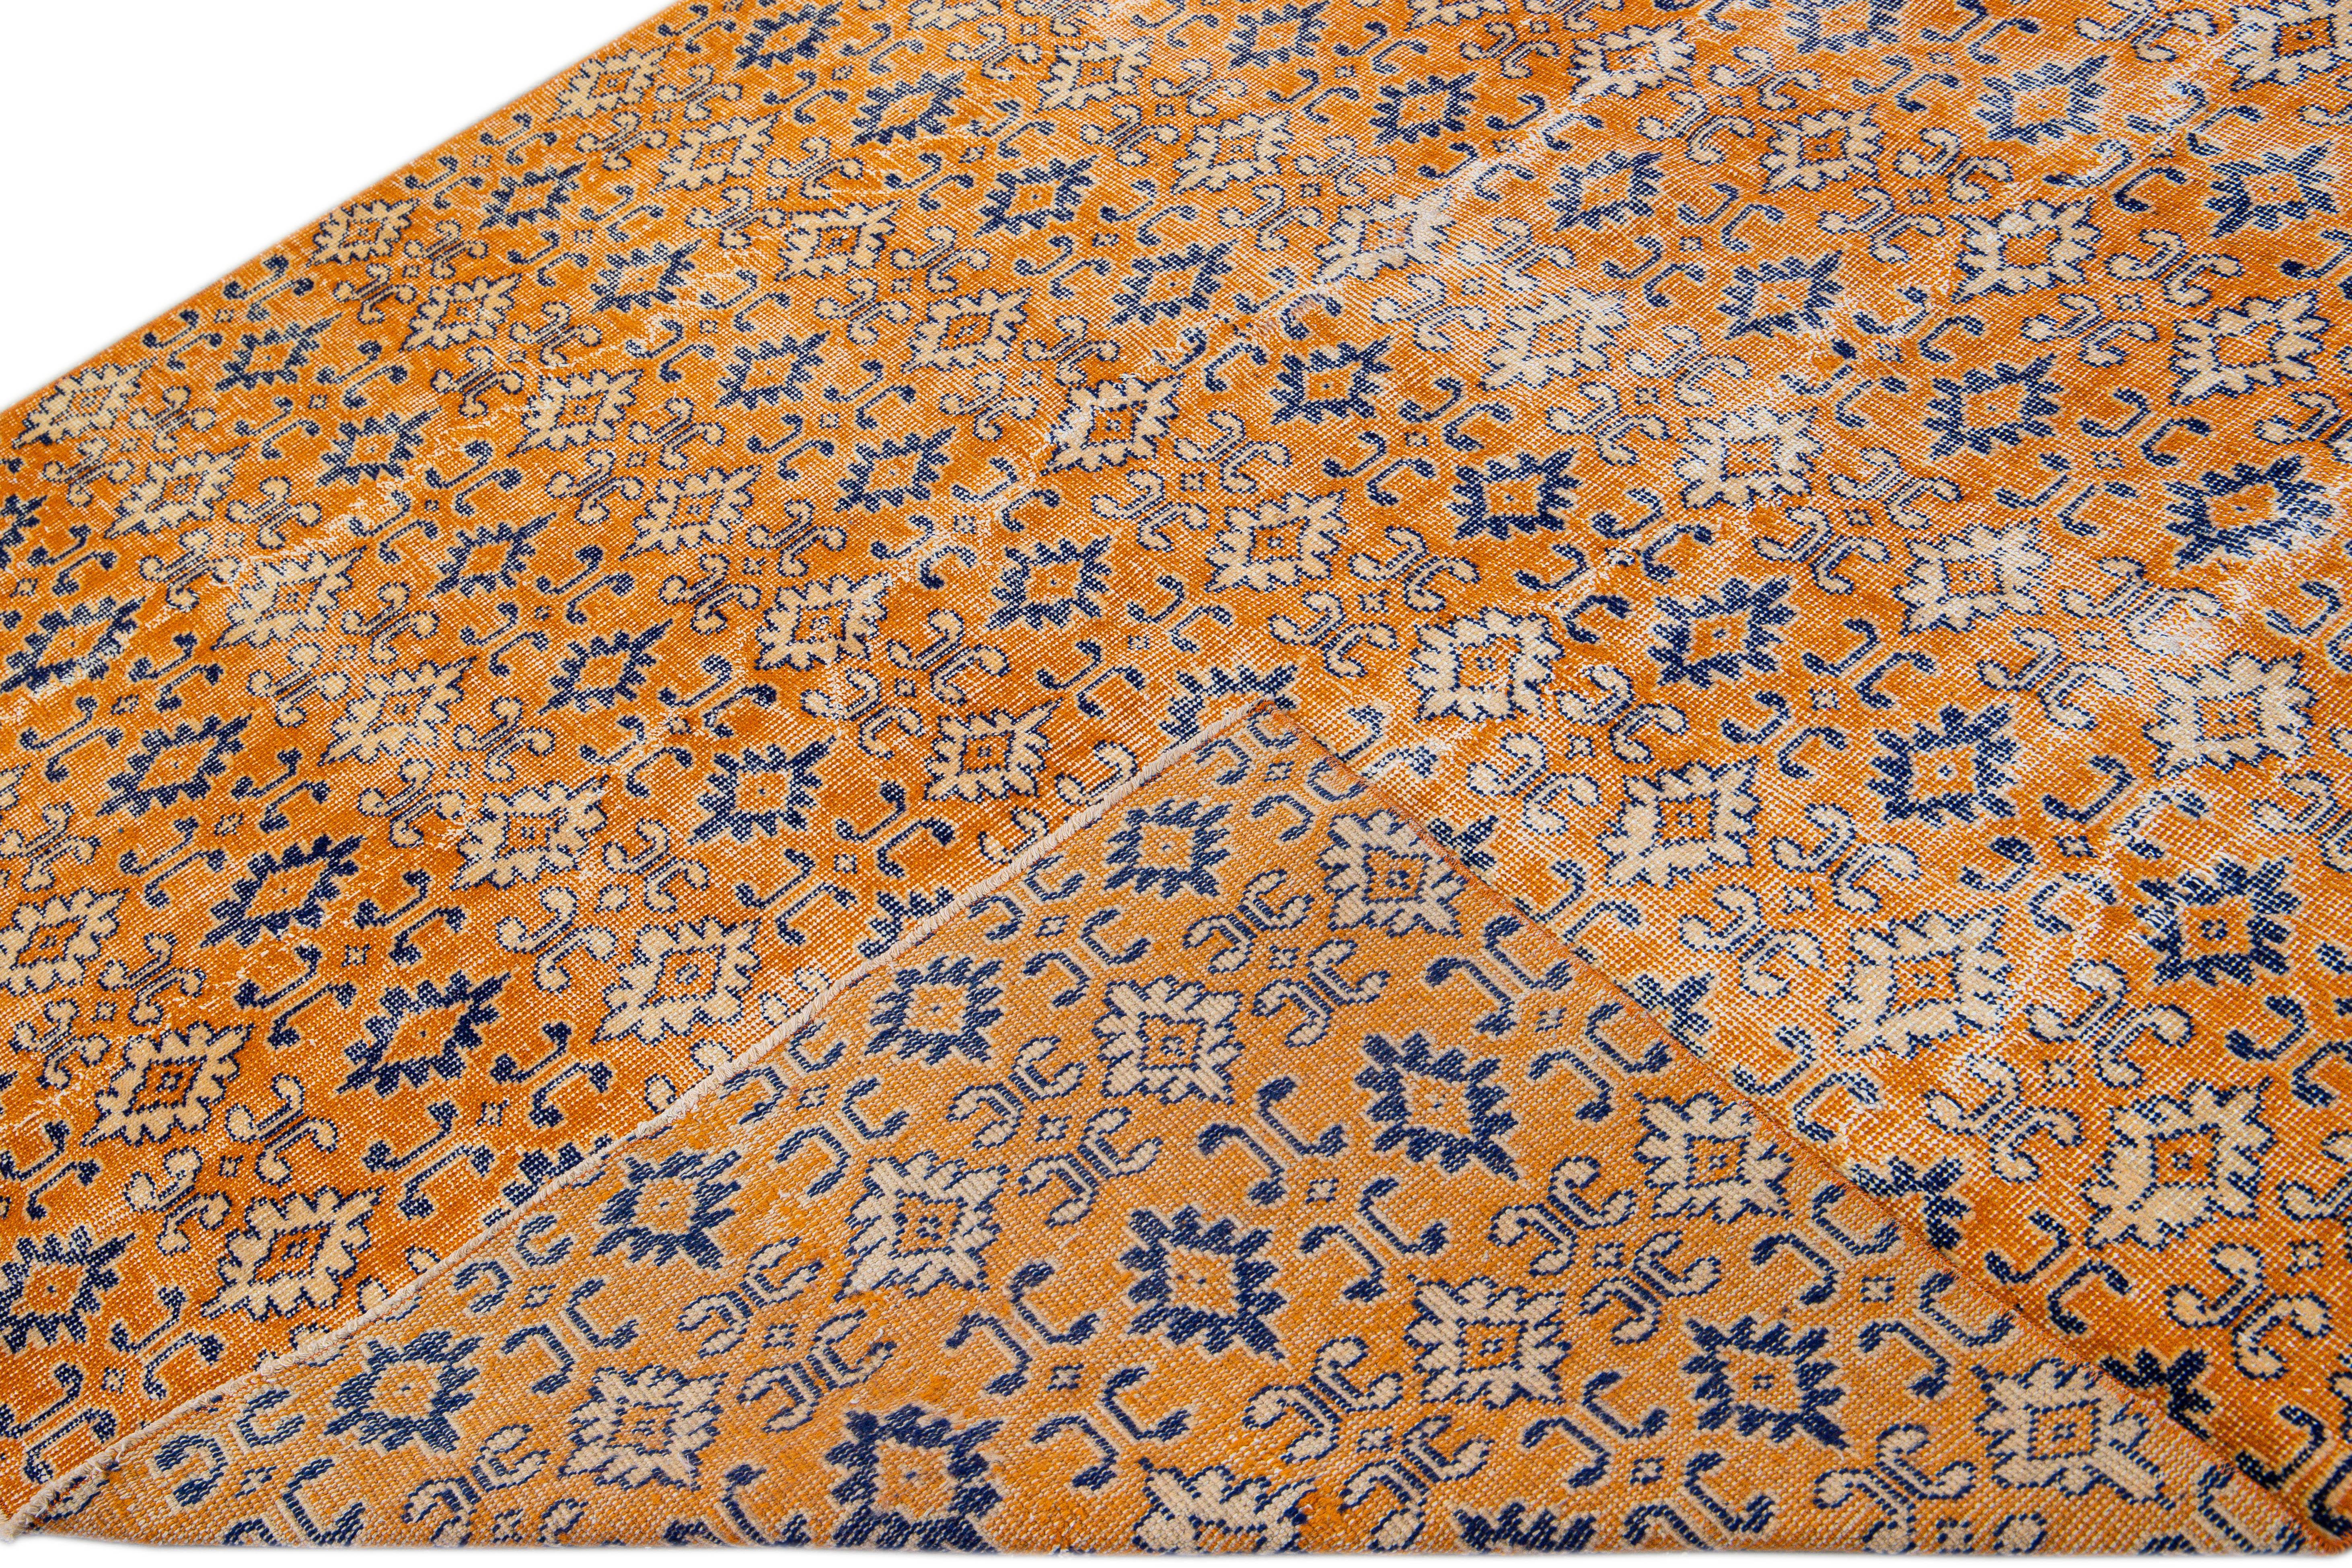 Beautiful vintage Deco Turkish hand-knotted wool rug with an orange field. This Turkish rug has blue and peach accents in a gorgeous all-over geometric floral pattern design.

This rug measures: 6'6